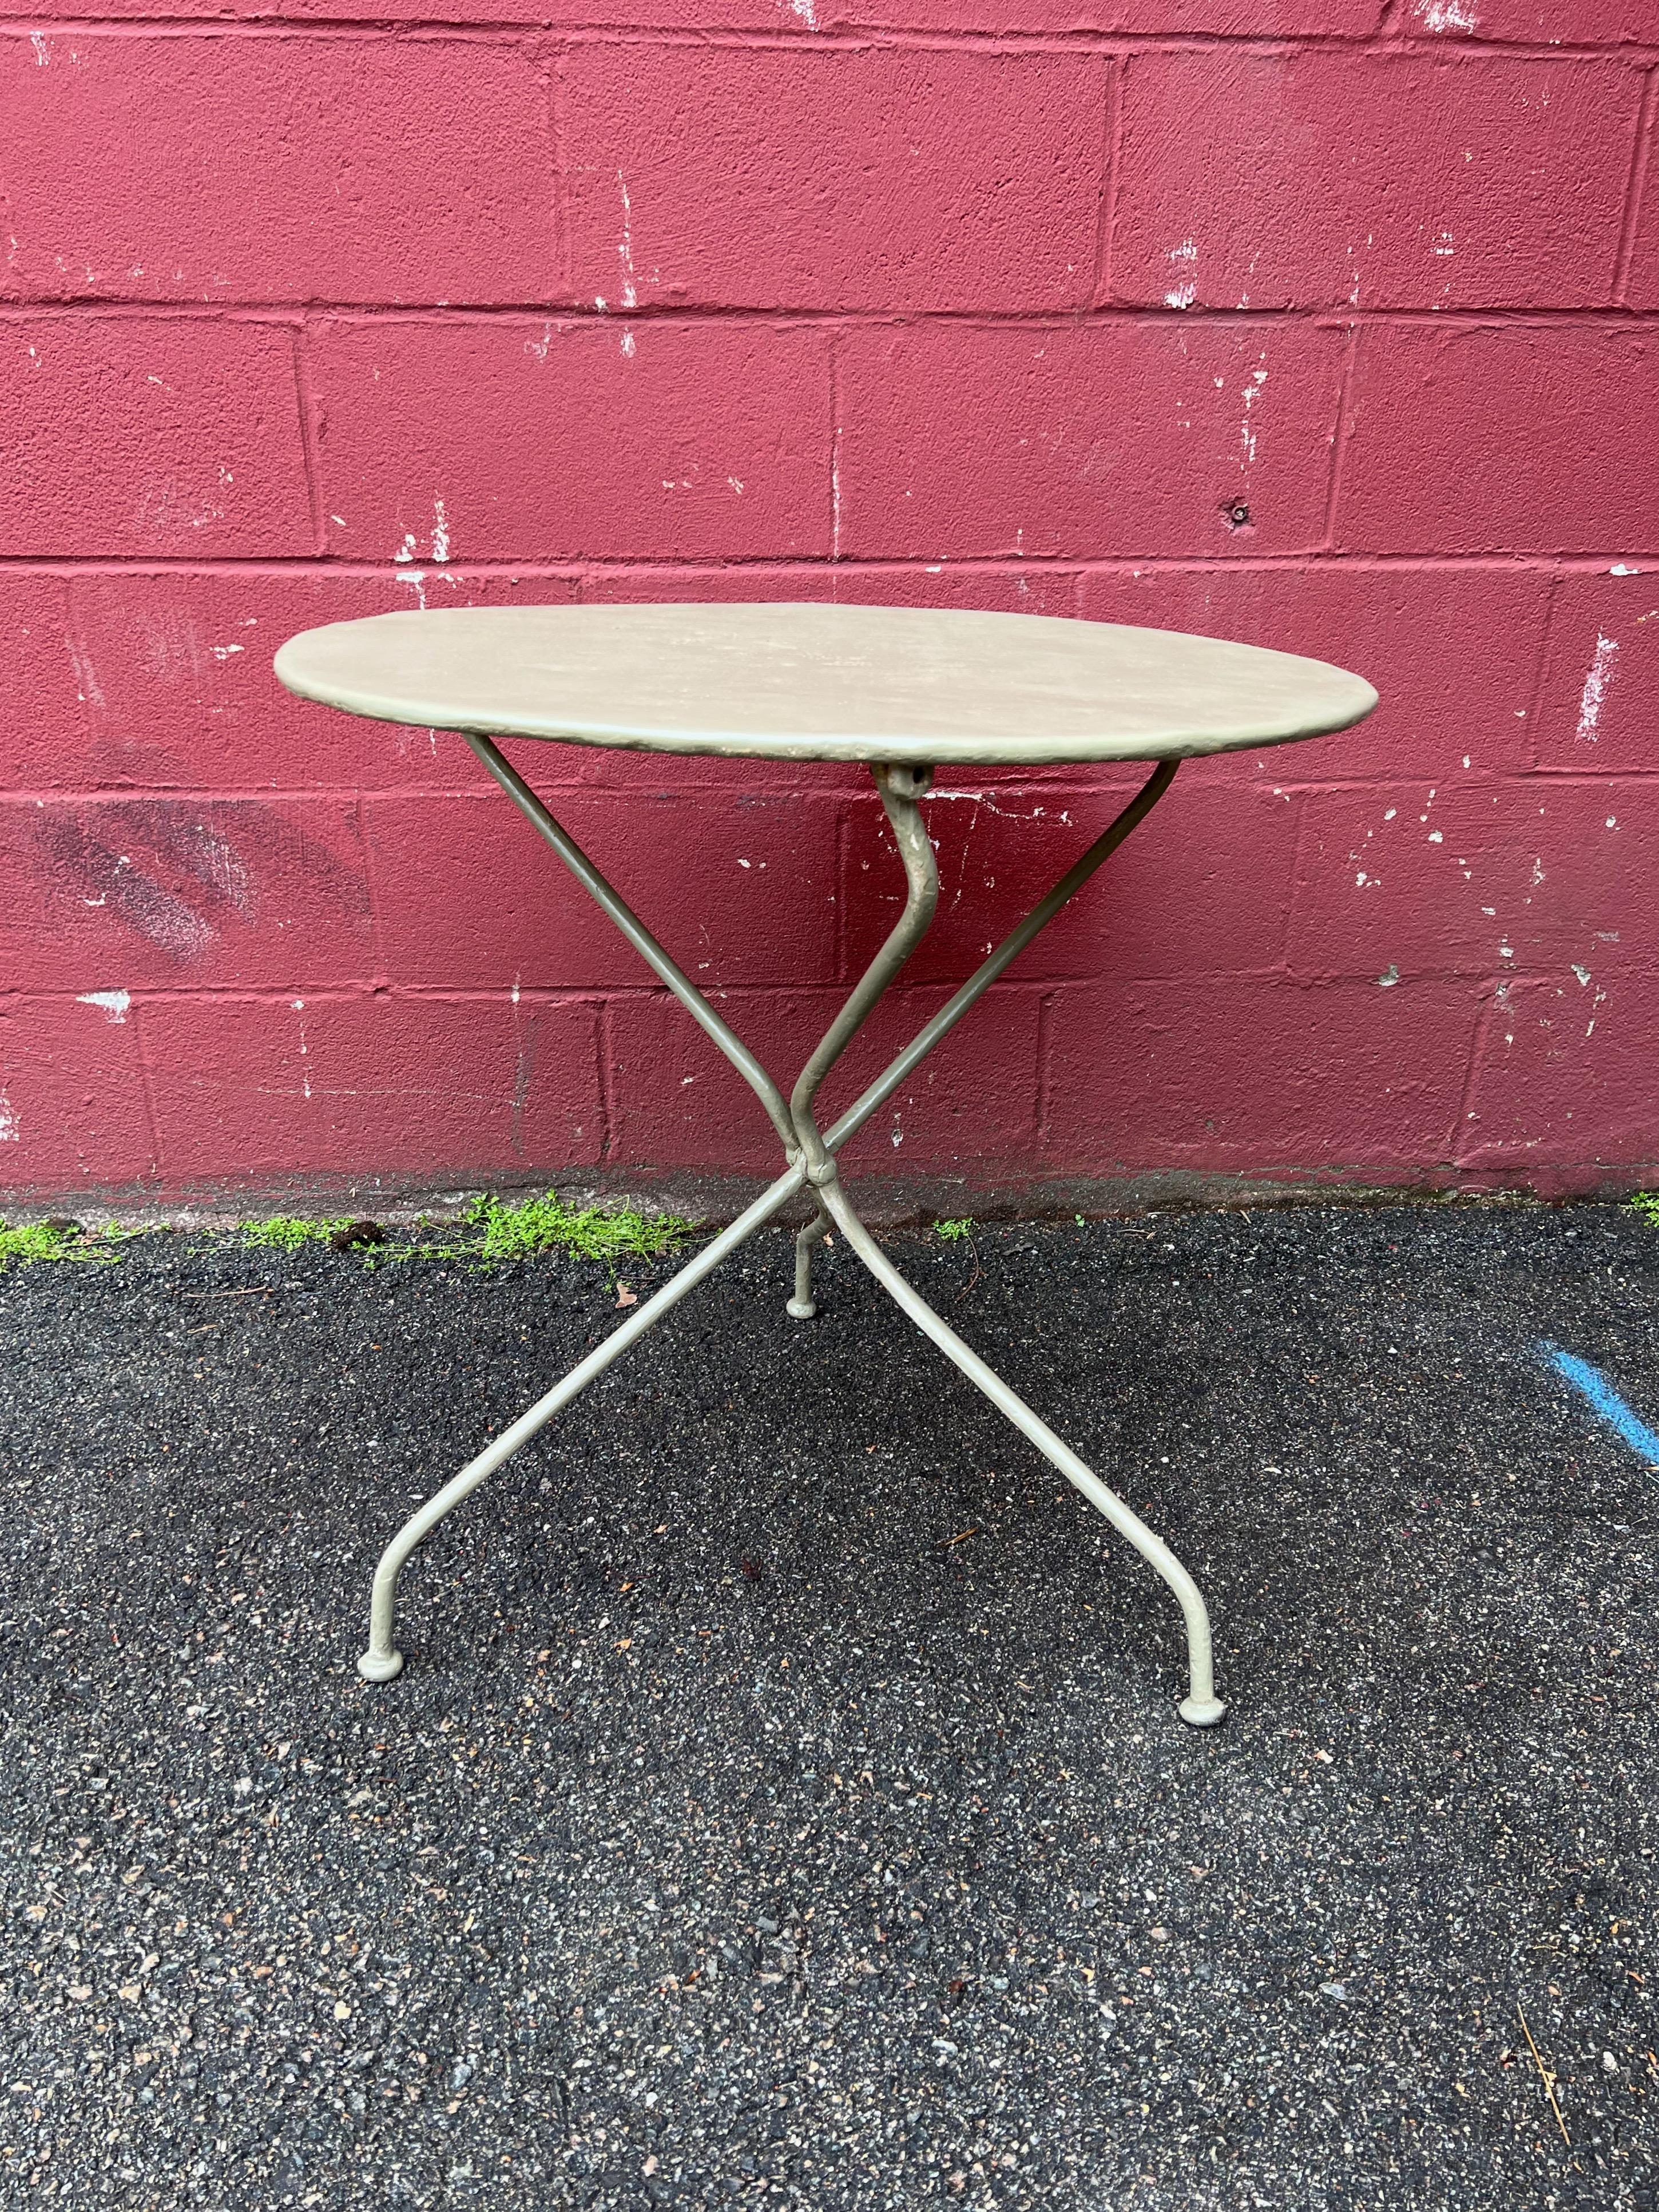 This small French bistro or garden table is a unique and versatile piece of furniture. Its tripod base can be easily folded for convenient storage, making it a great option for smaller outdoor spaces or for those who like to switch up their outdoor